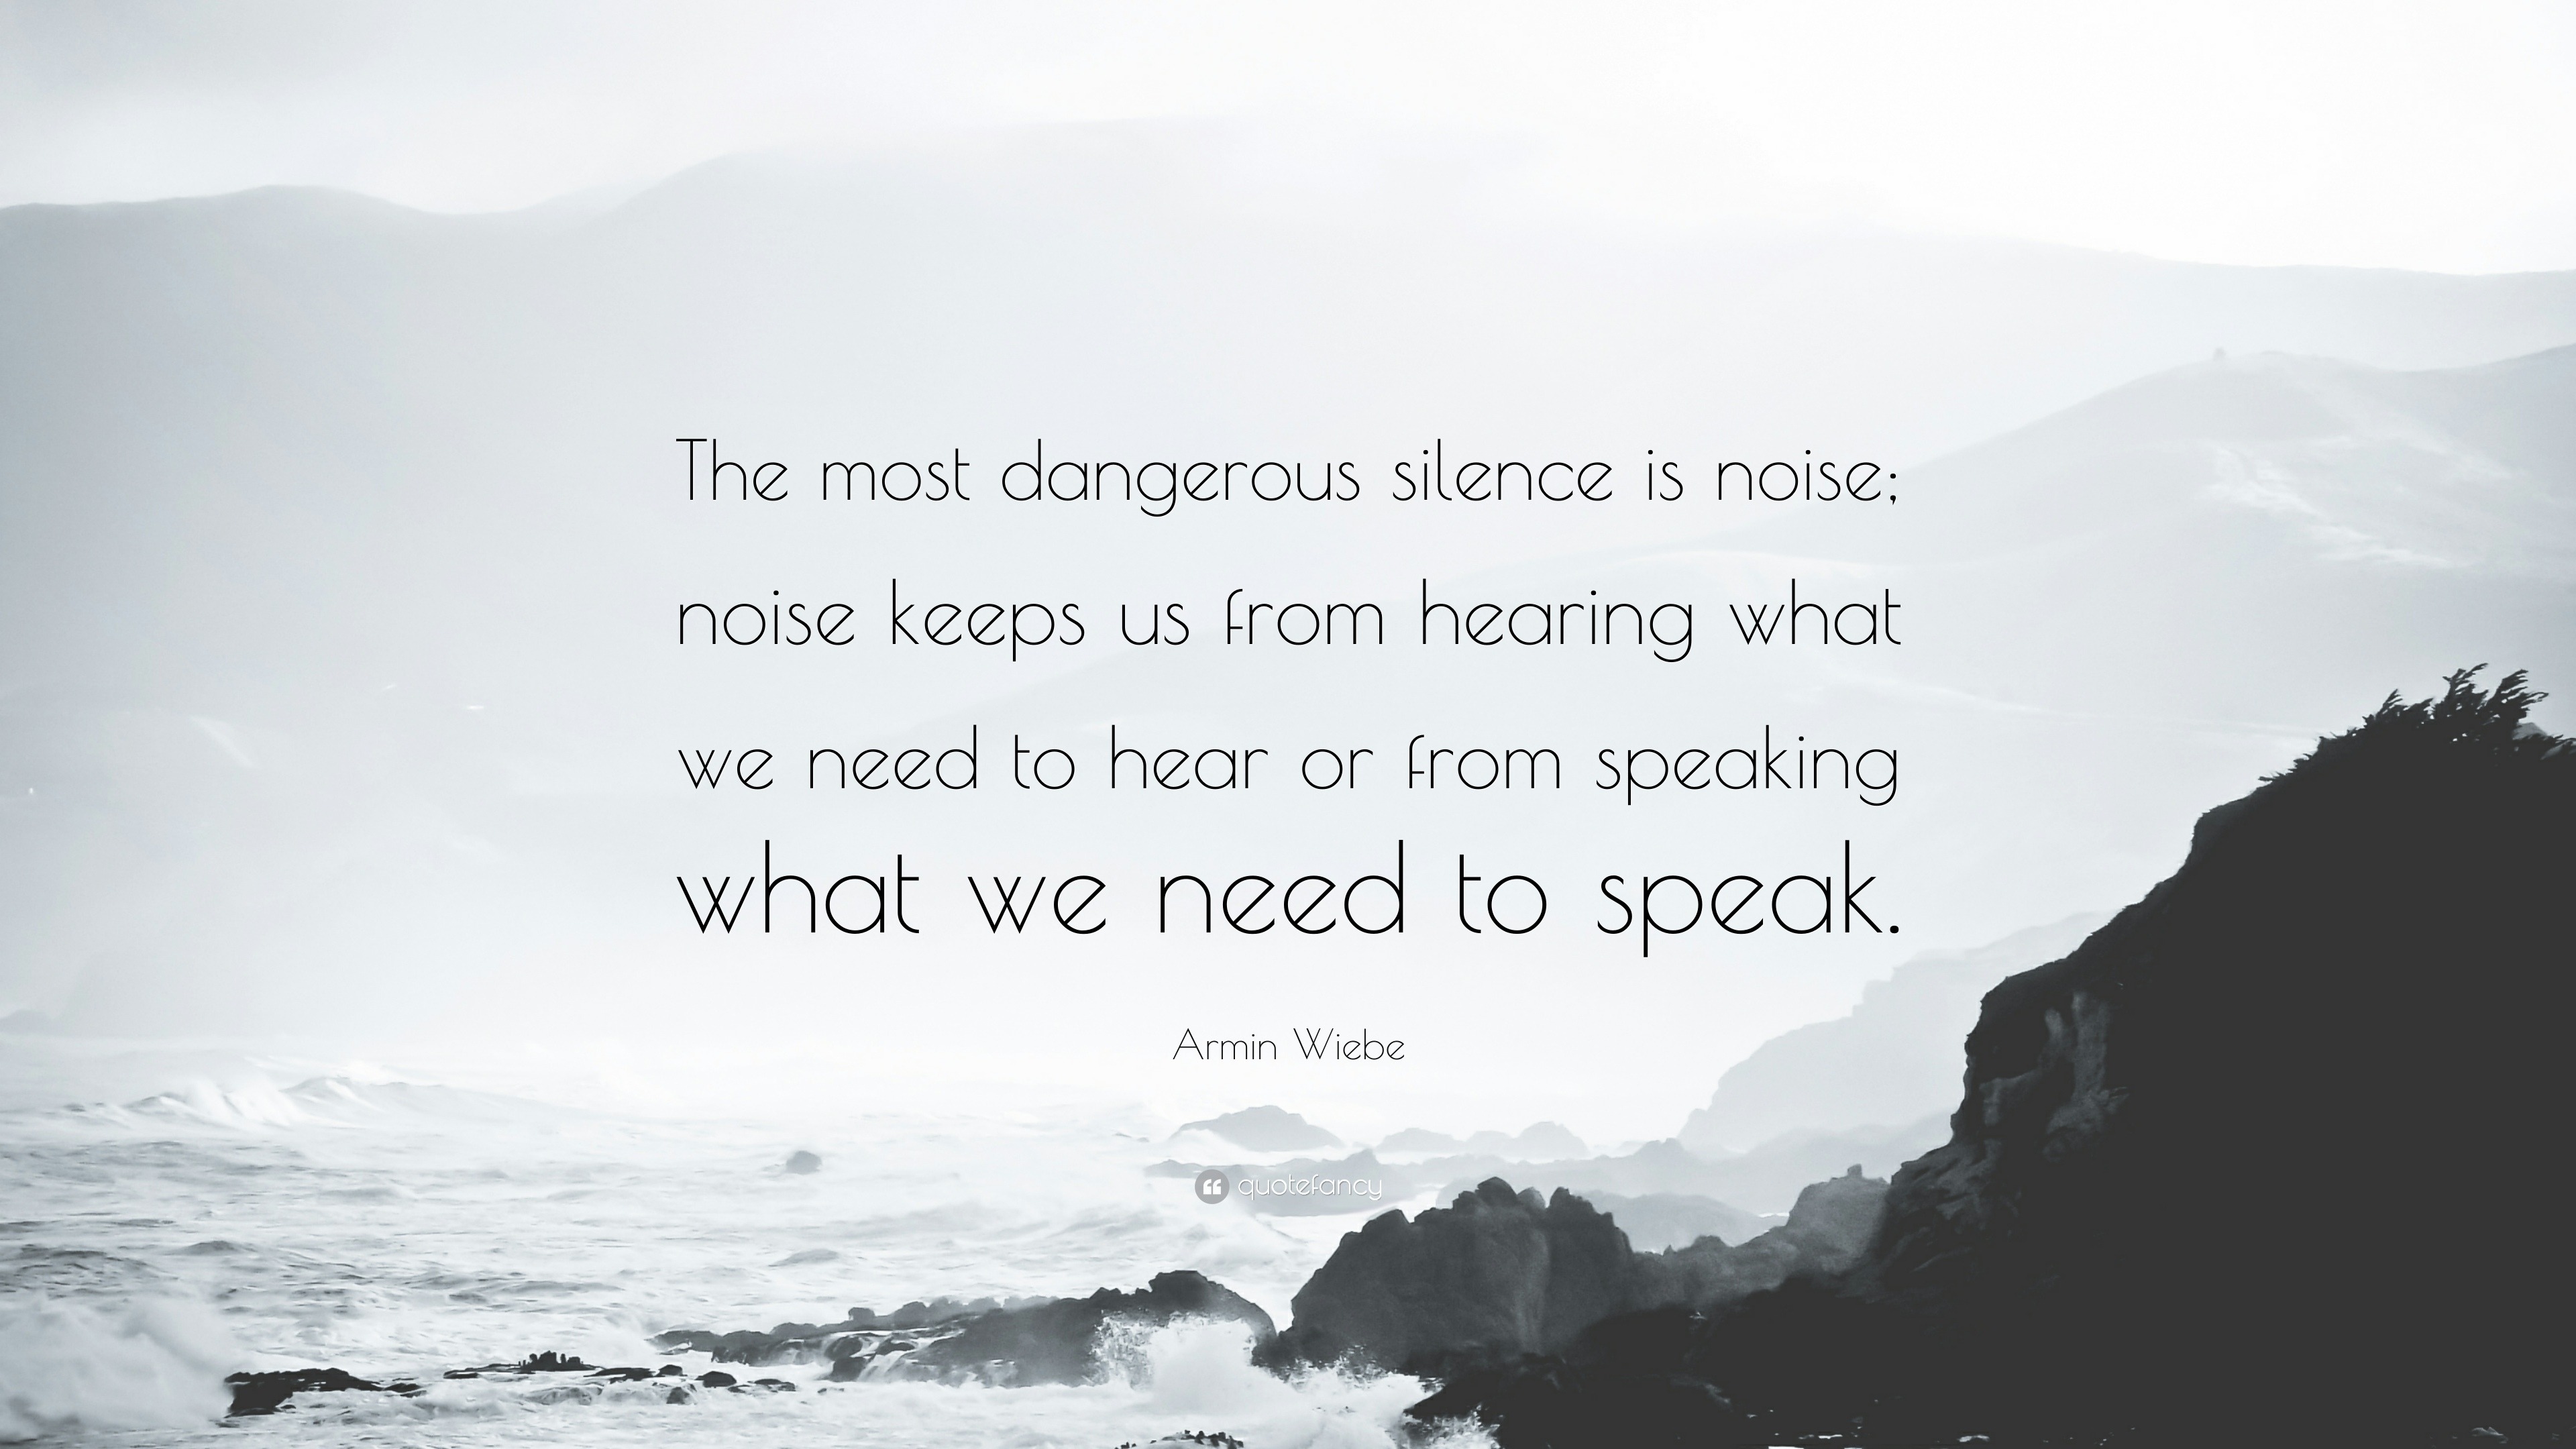 Armin Wiebe Quote: “The most dangerous silence is noise; noise keeps us  from hearing what we need to hear or from speaking what we need to s”